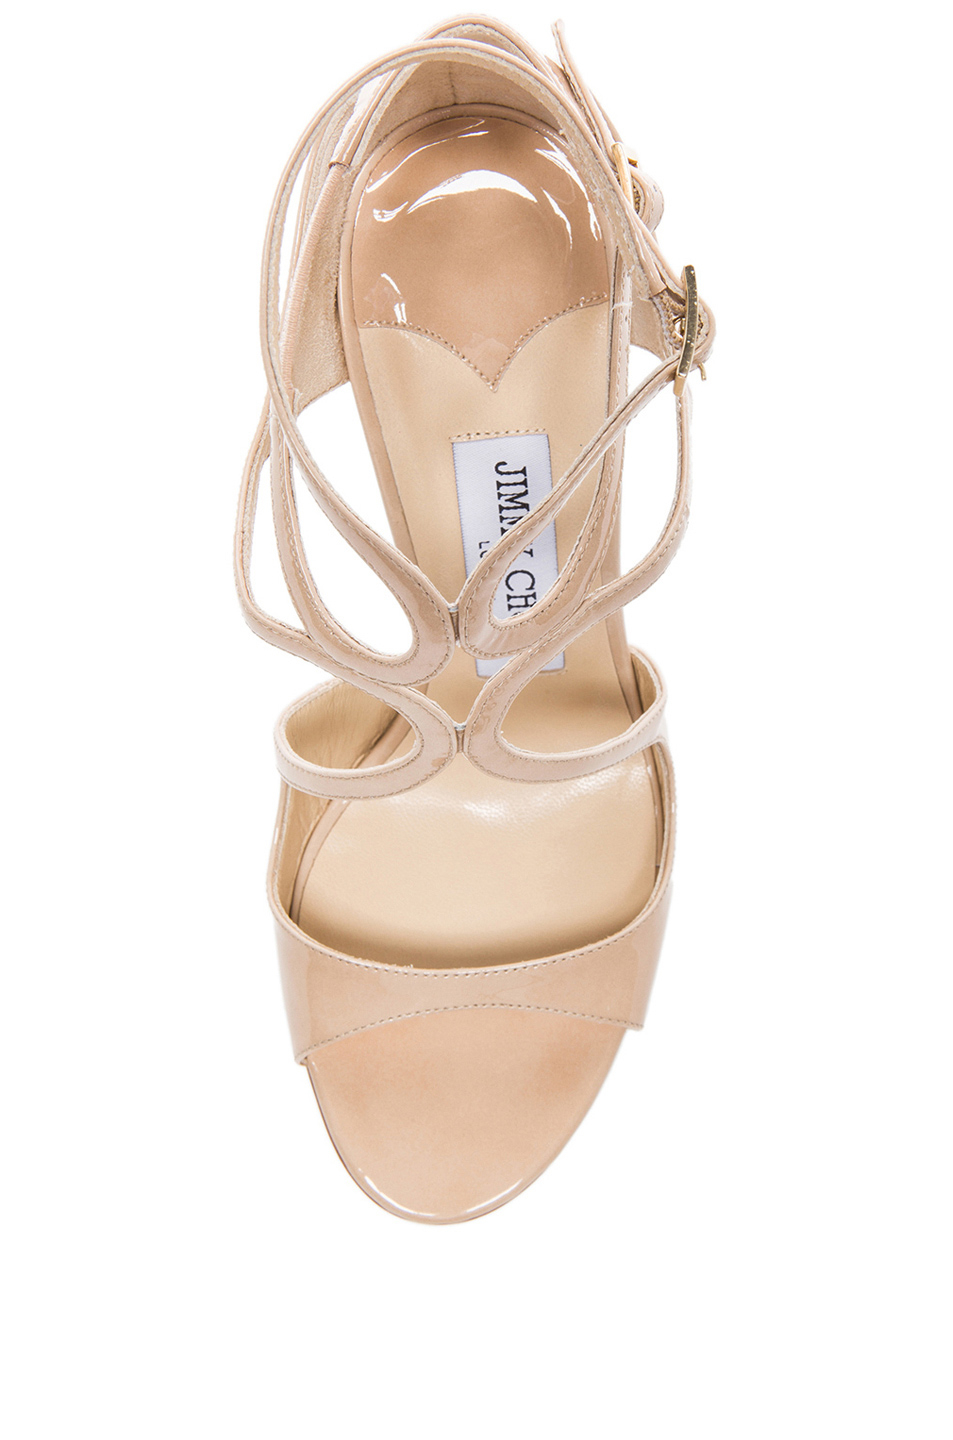 Jimmy Choo Lang Leather Heeled Sandals in Natural | Lyst